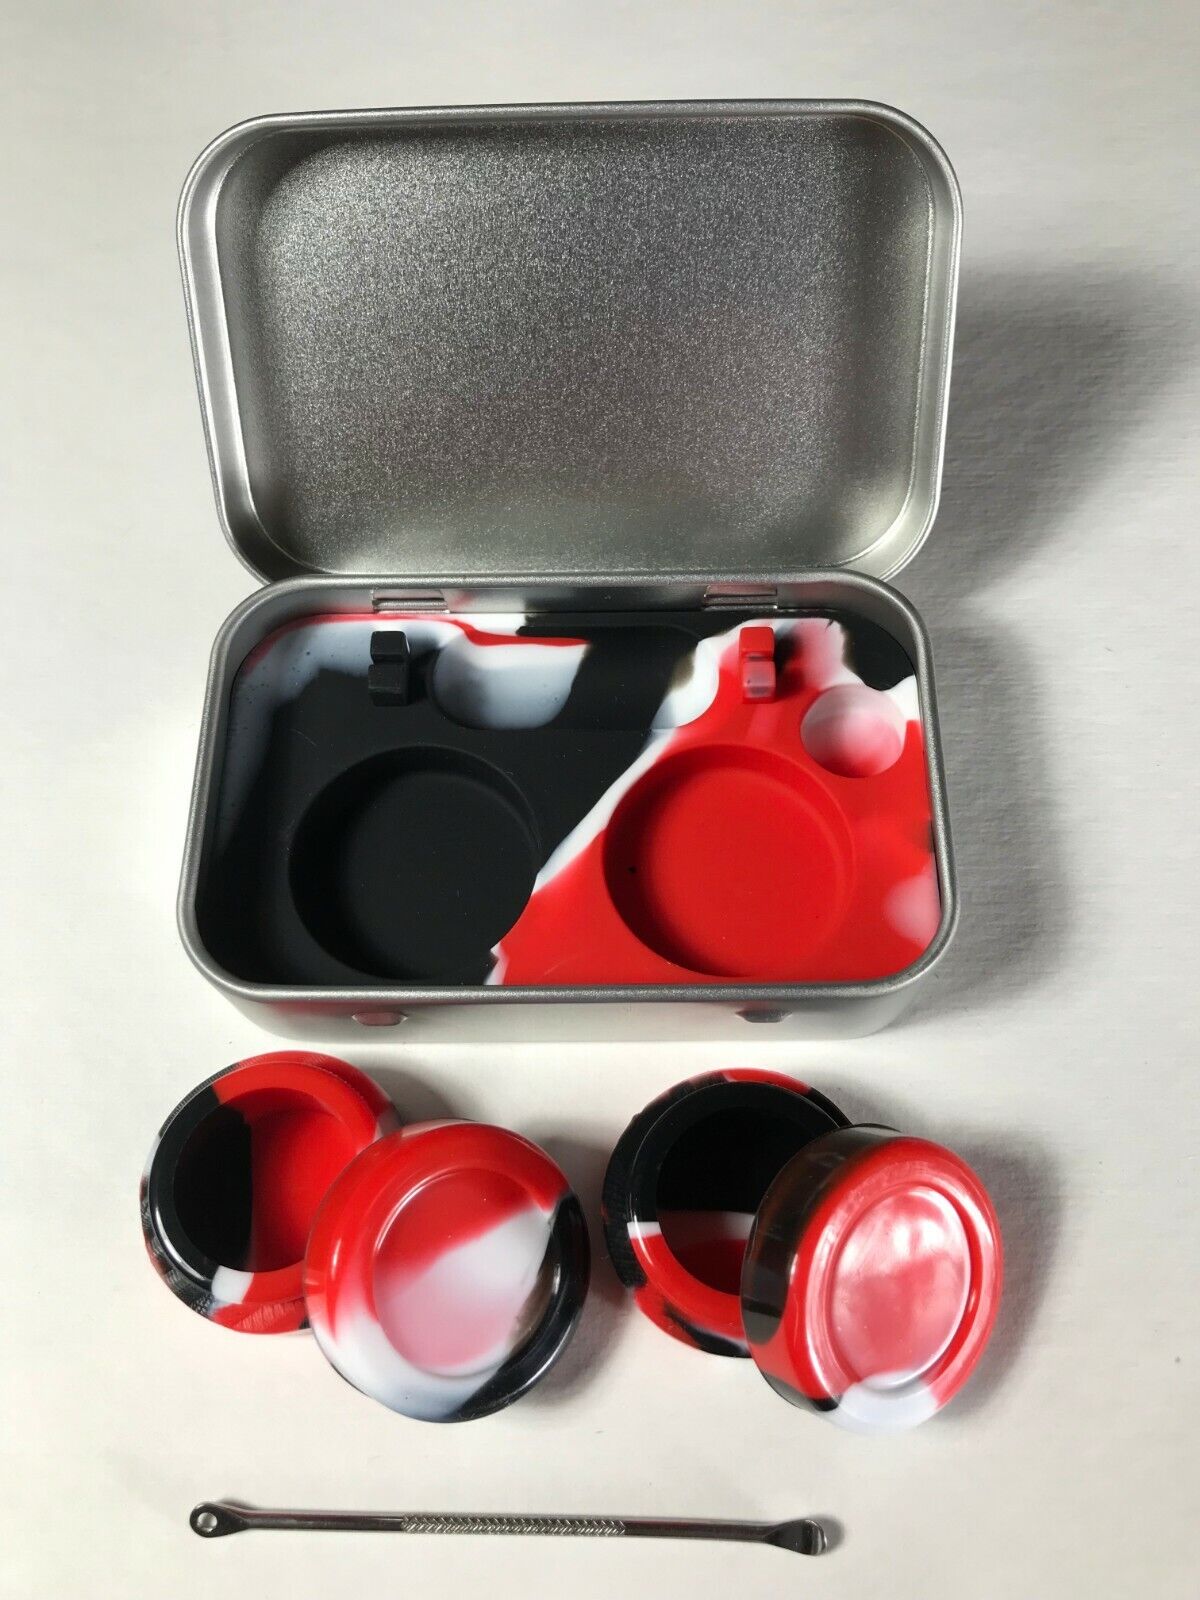 Redytek R2P Discreet Travel Tin 2x 5ml Silicone Container in (Red/Wht/Blk) 🇺🇸